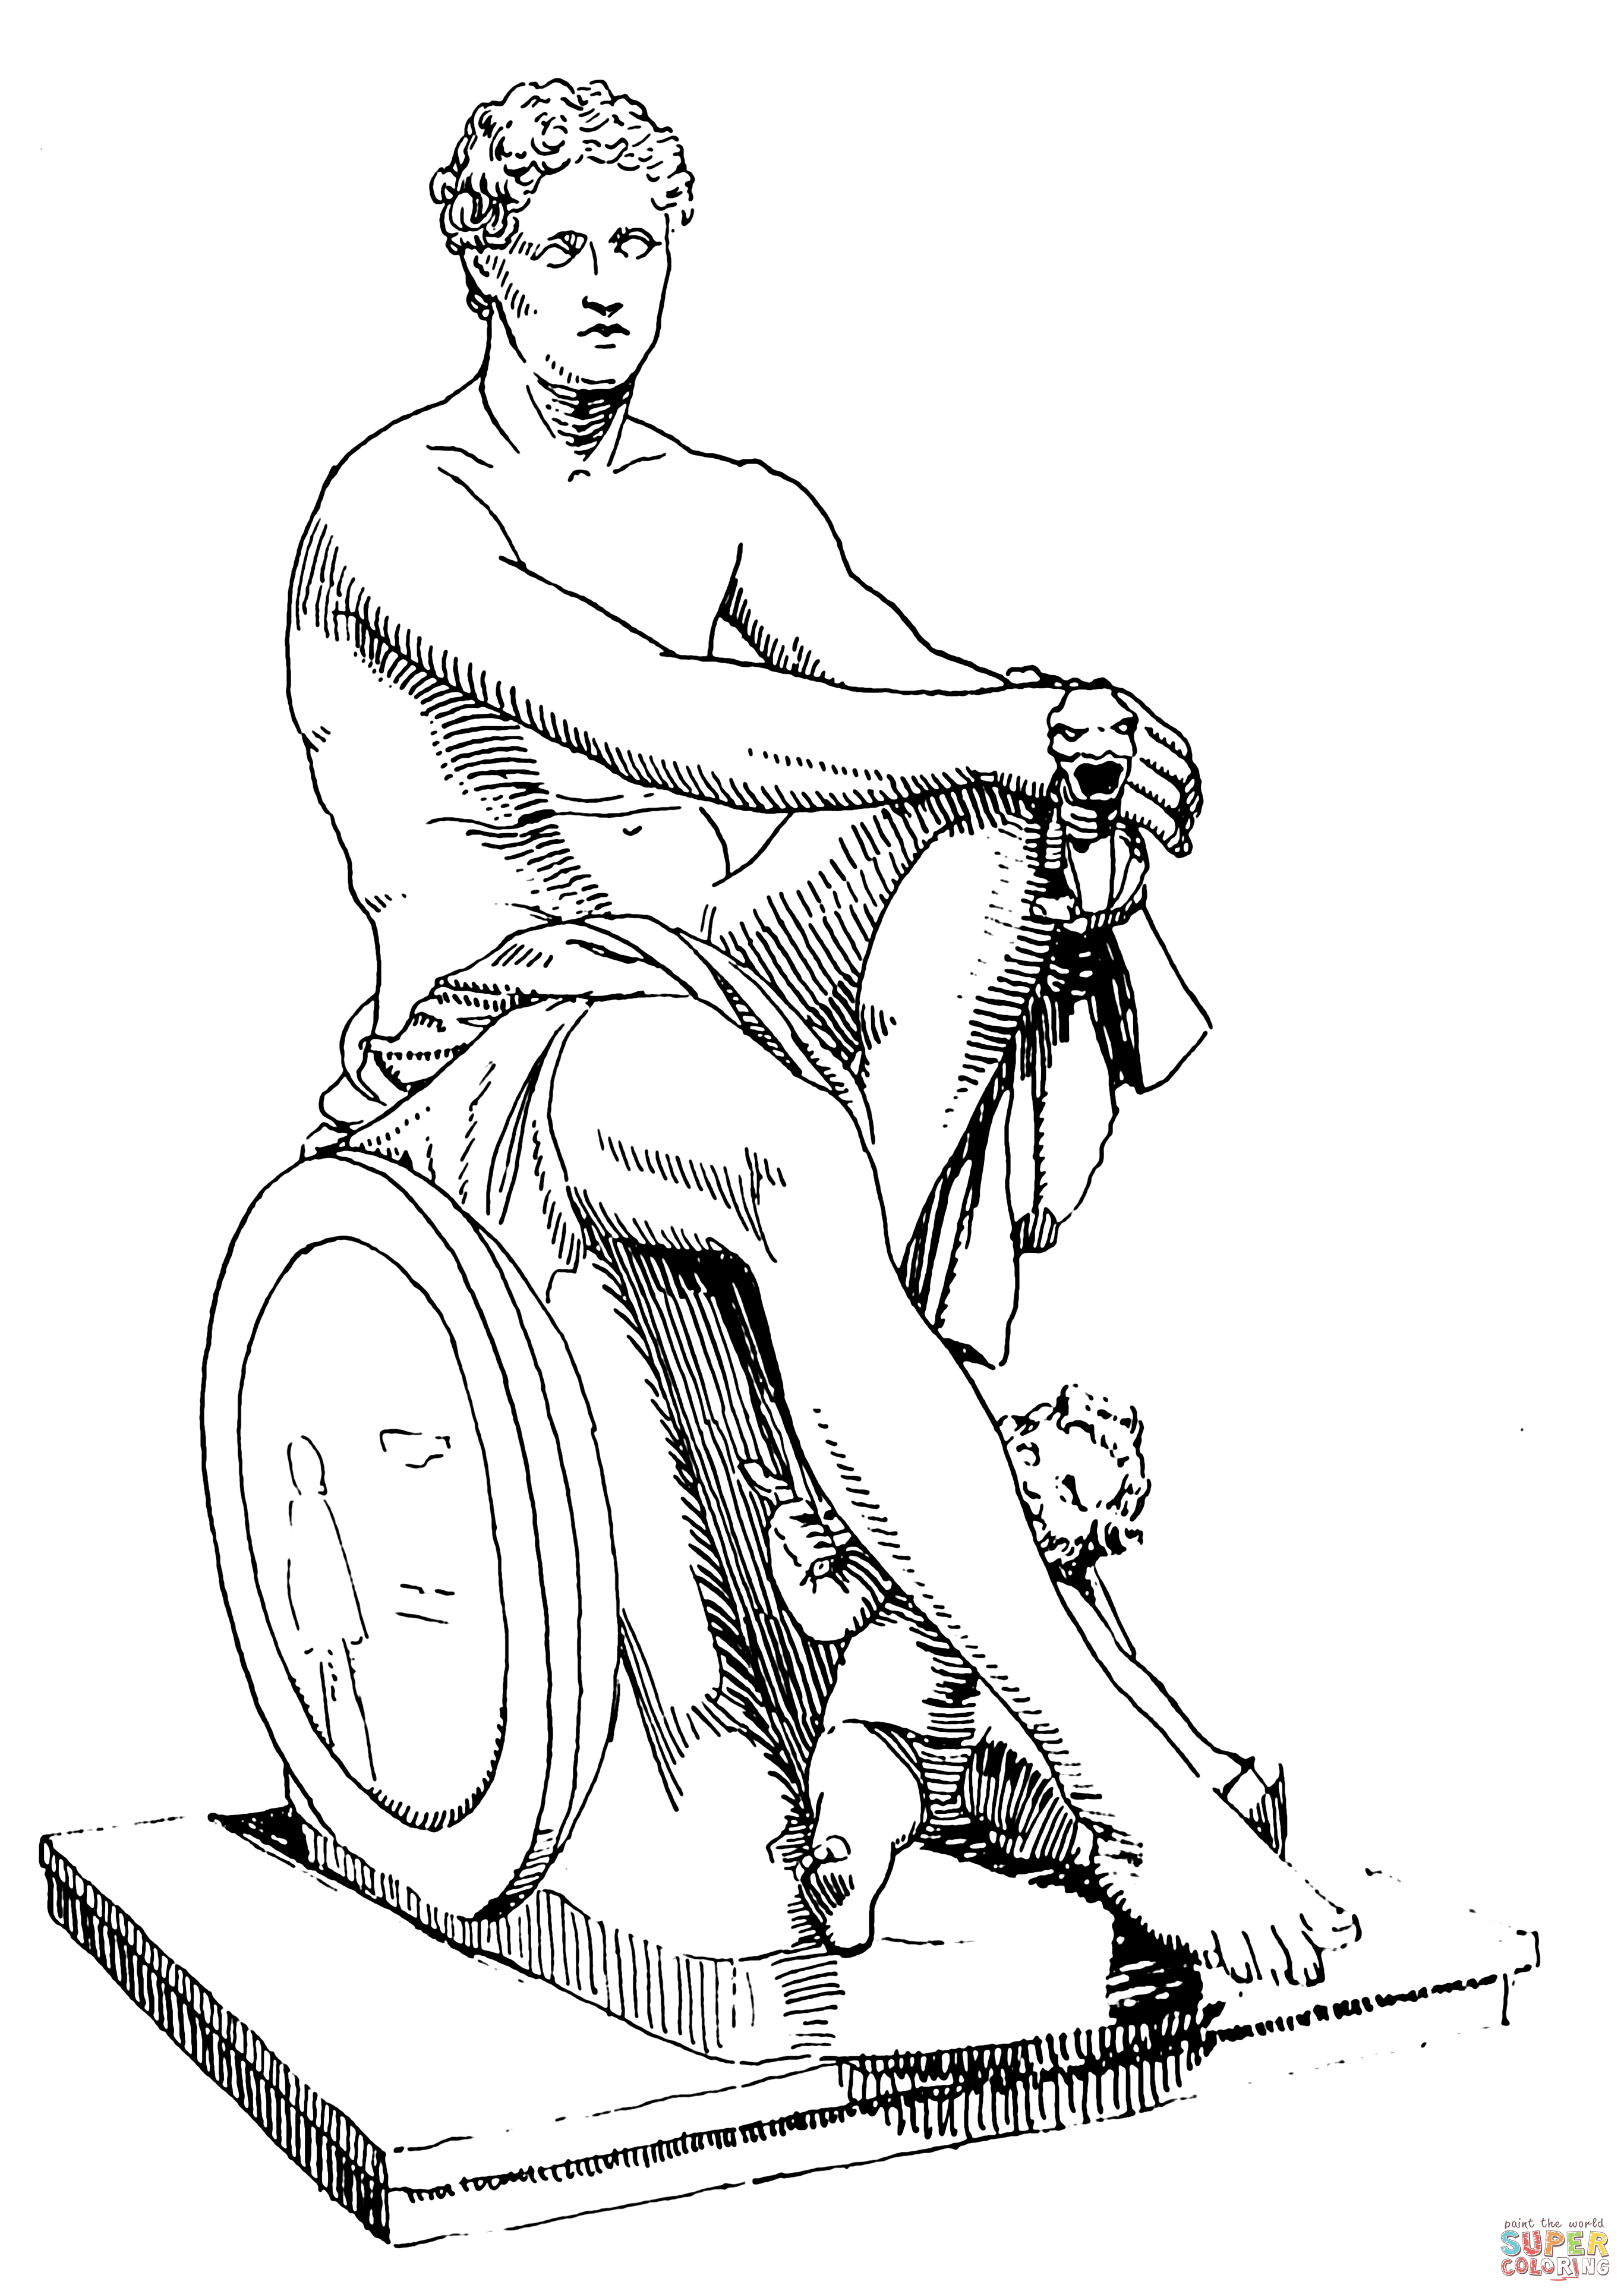 Ares Statue coloring page | Free Printable Coloring Pages